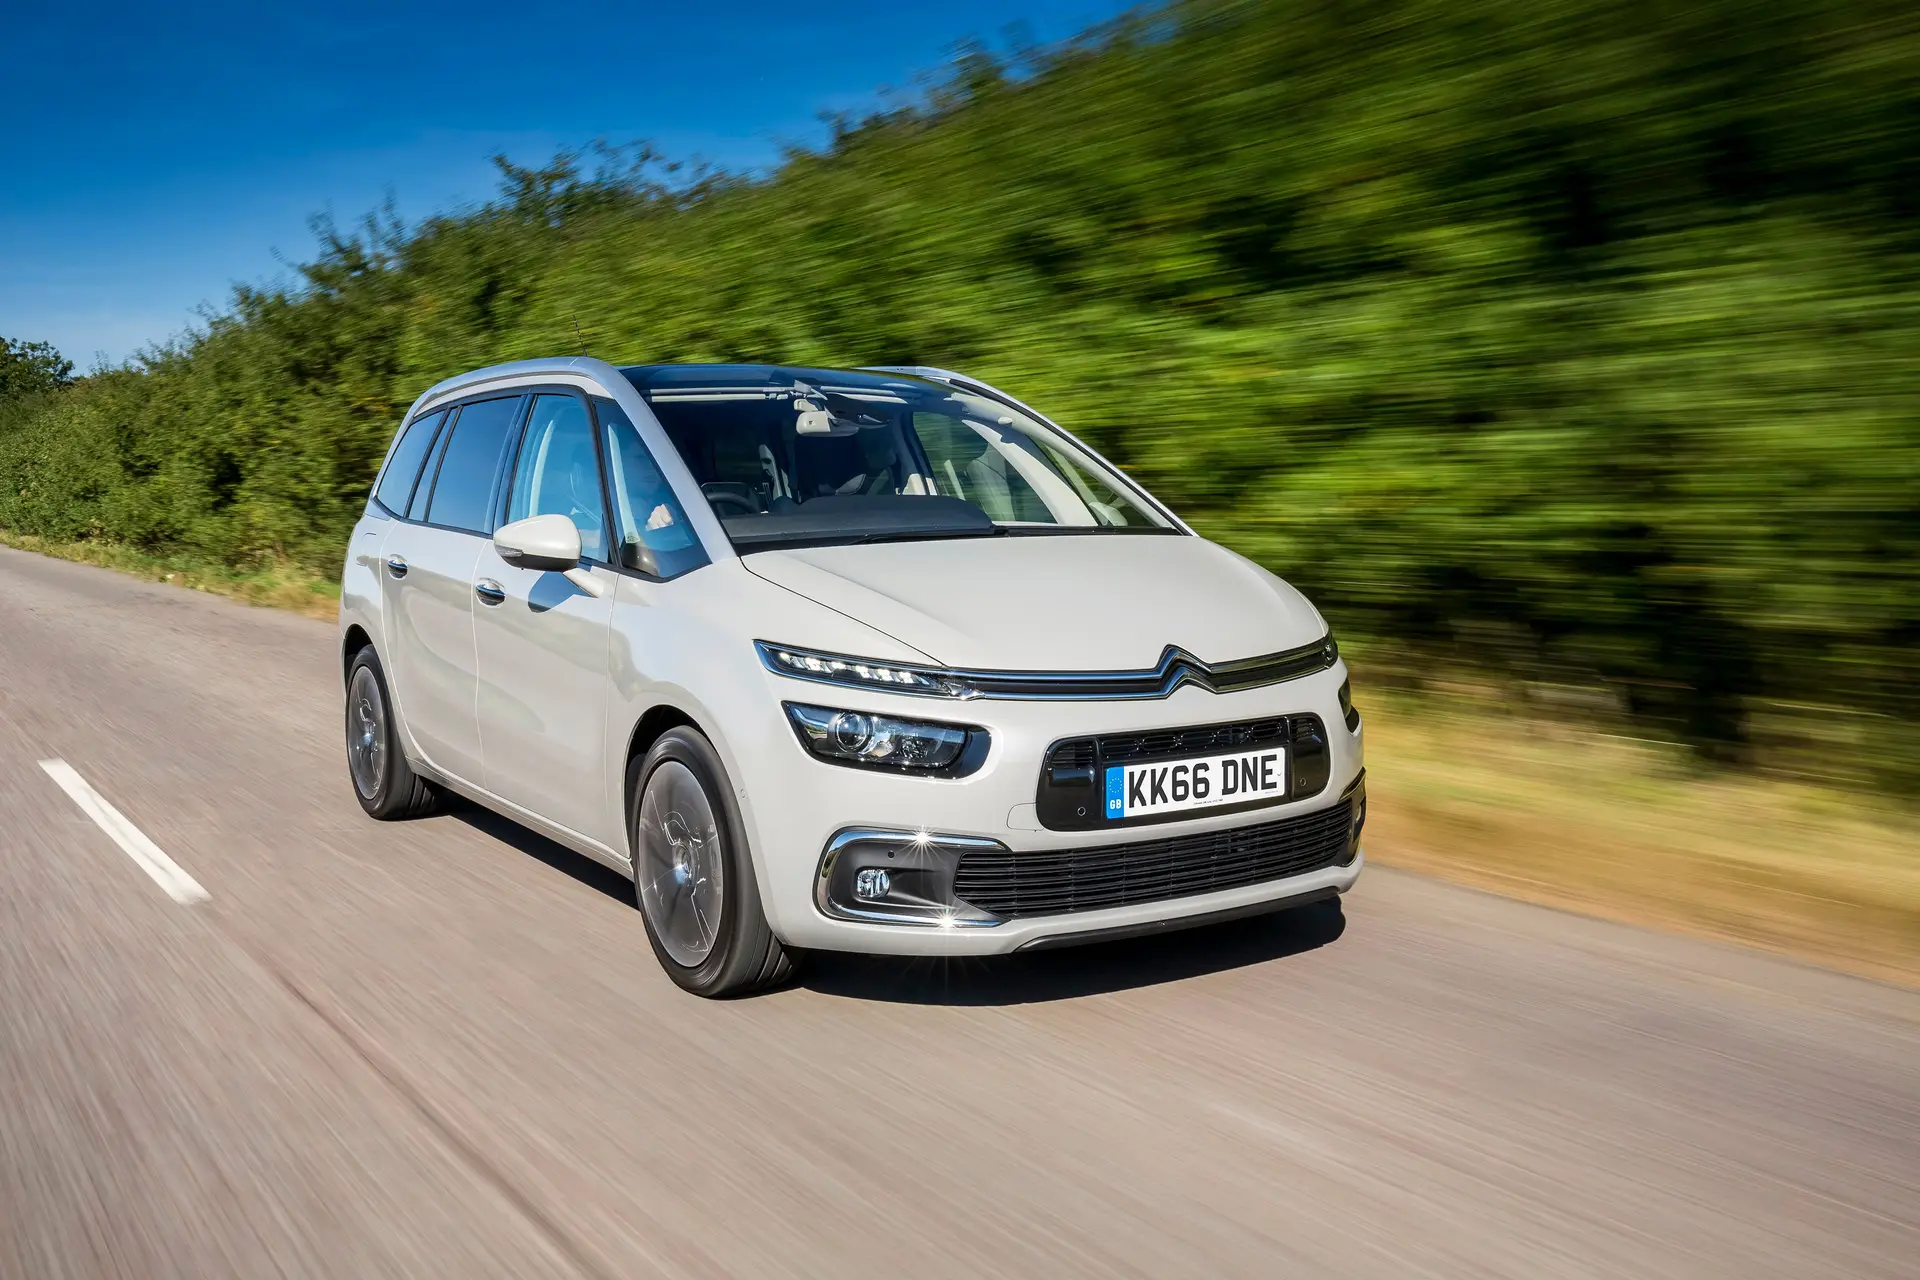 Citroen Grand C4 Picasso (2014-2018) Review: exterior front three quarter photo of the Citroen Grand C4 Picasso on the road  